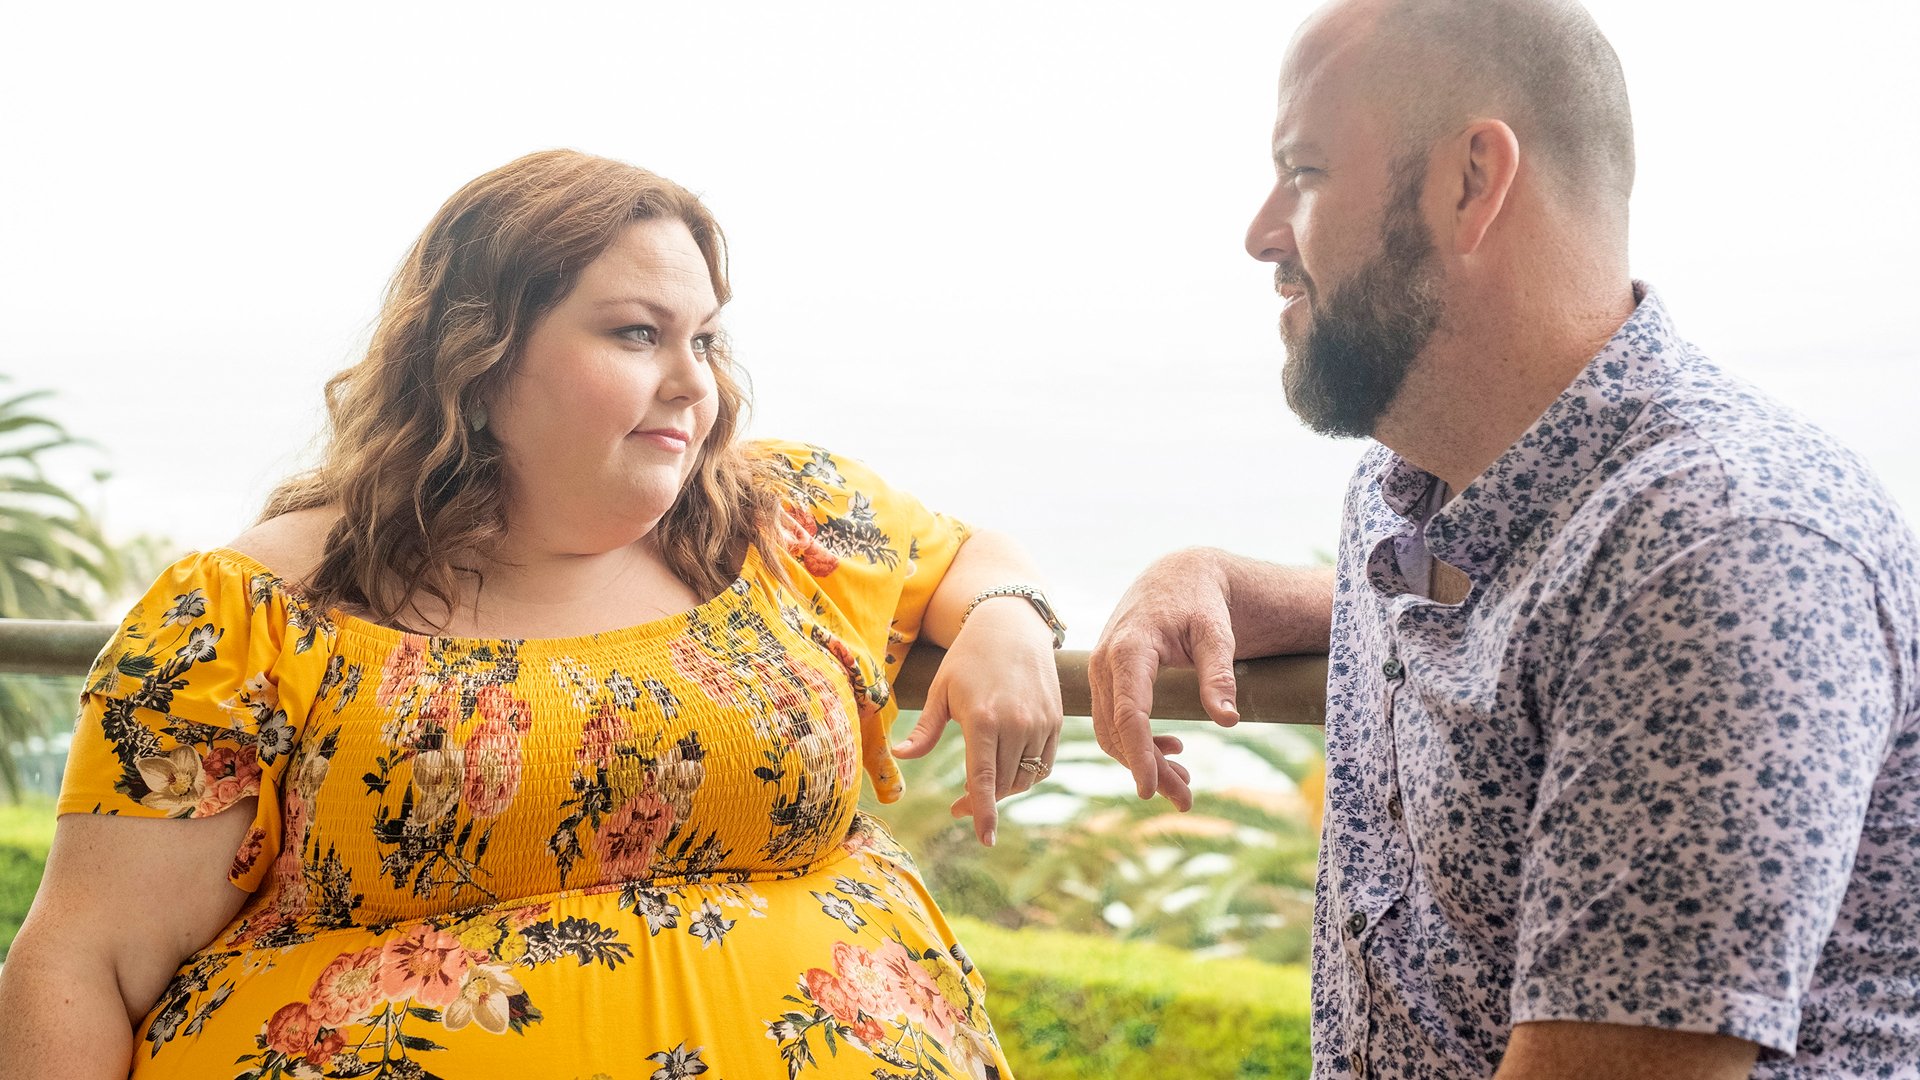 Chrissy Metz as Kate and Chris Sullivan as Toby talk before Kevin and Madison’s wedding in the ‘This Is Us’ Season 5 Episode 16 finale